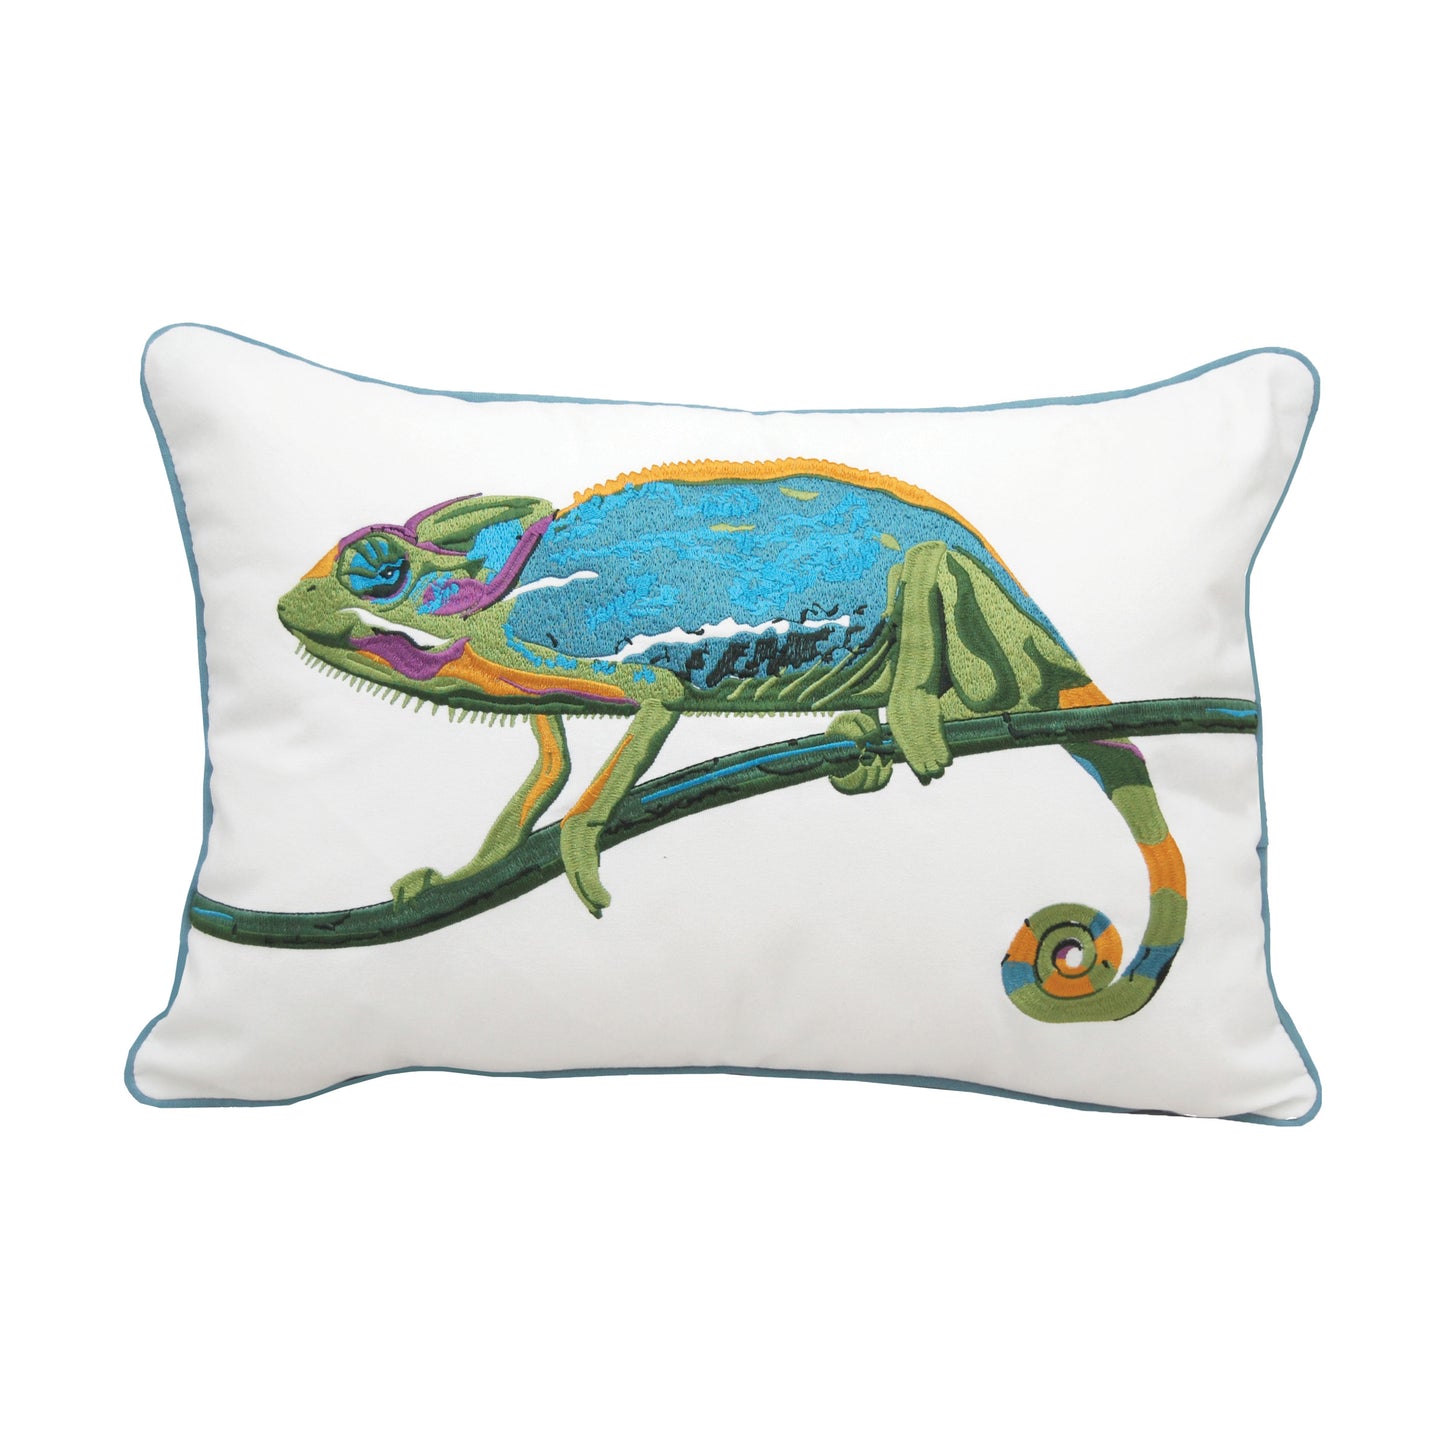 Multicolored chameleon walking a branch, embroidered on a white background with blue piped edging.